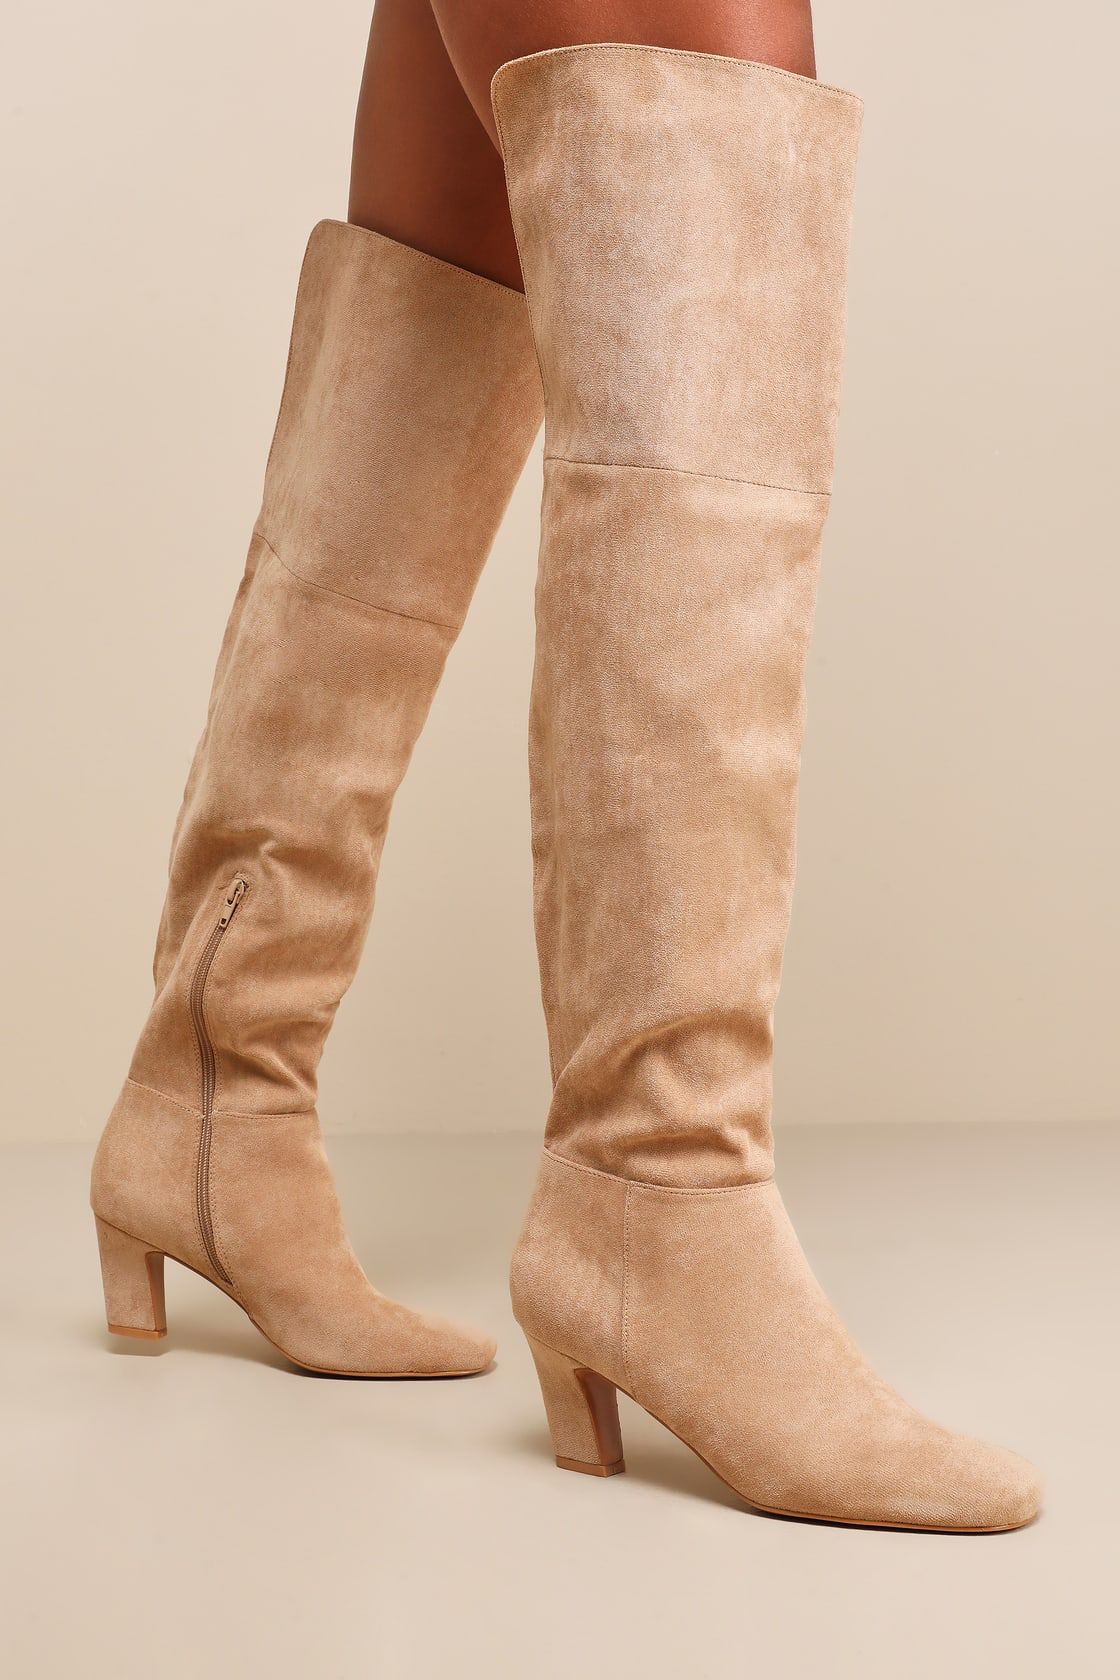 Lilo Mushroom Brown Suede Square-Toe Over-the-Knee Boots | Lulus